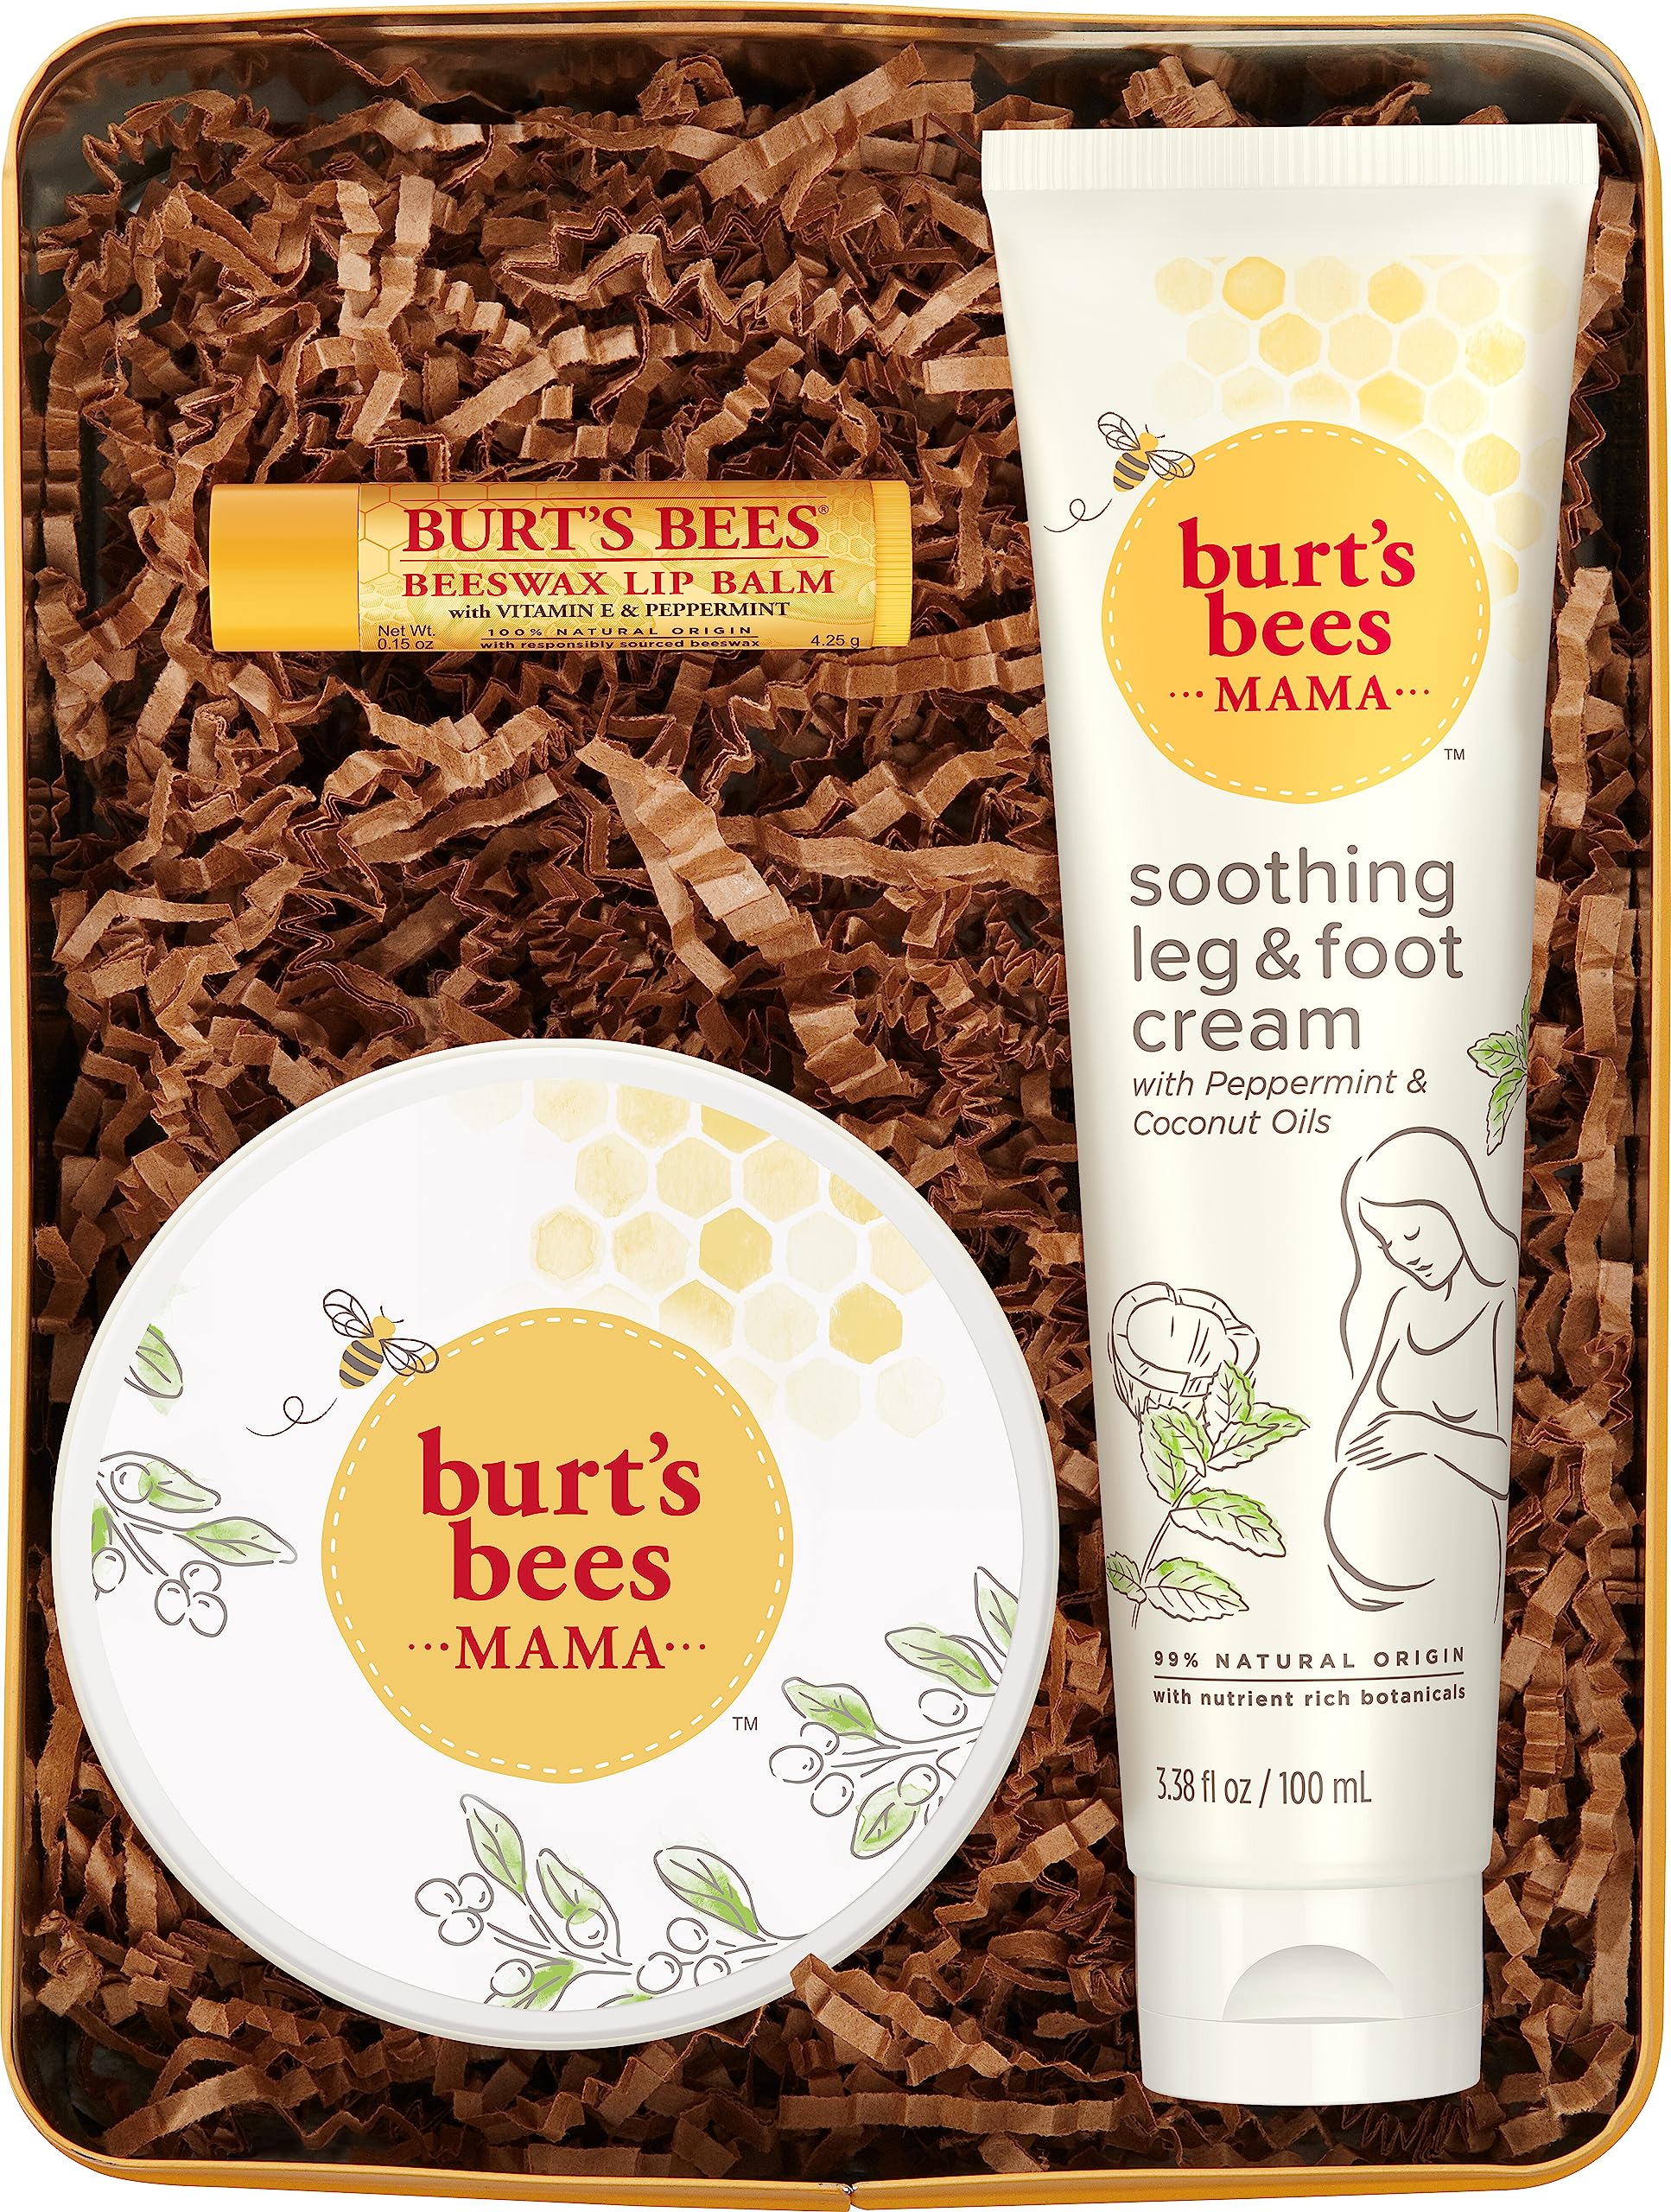 Burt's Bees Pregnancy Essentials Gift Set, 3 Giftable Baby Shower Products & Must Have Baby Registry Items, Nourishing Skincare for Mom to be - Mama Belly Butter, Original Lip Balm, Leg & Foot Cream